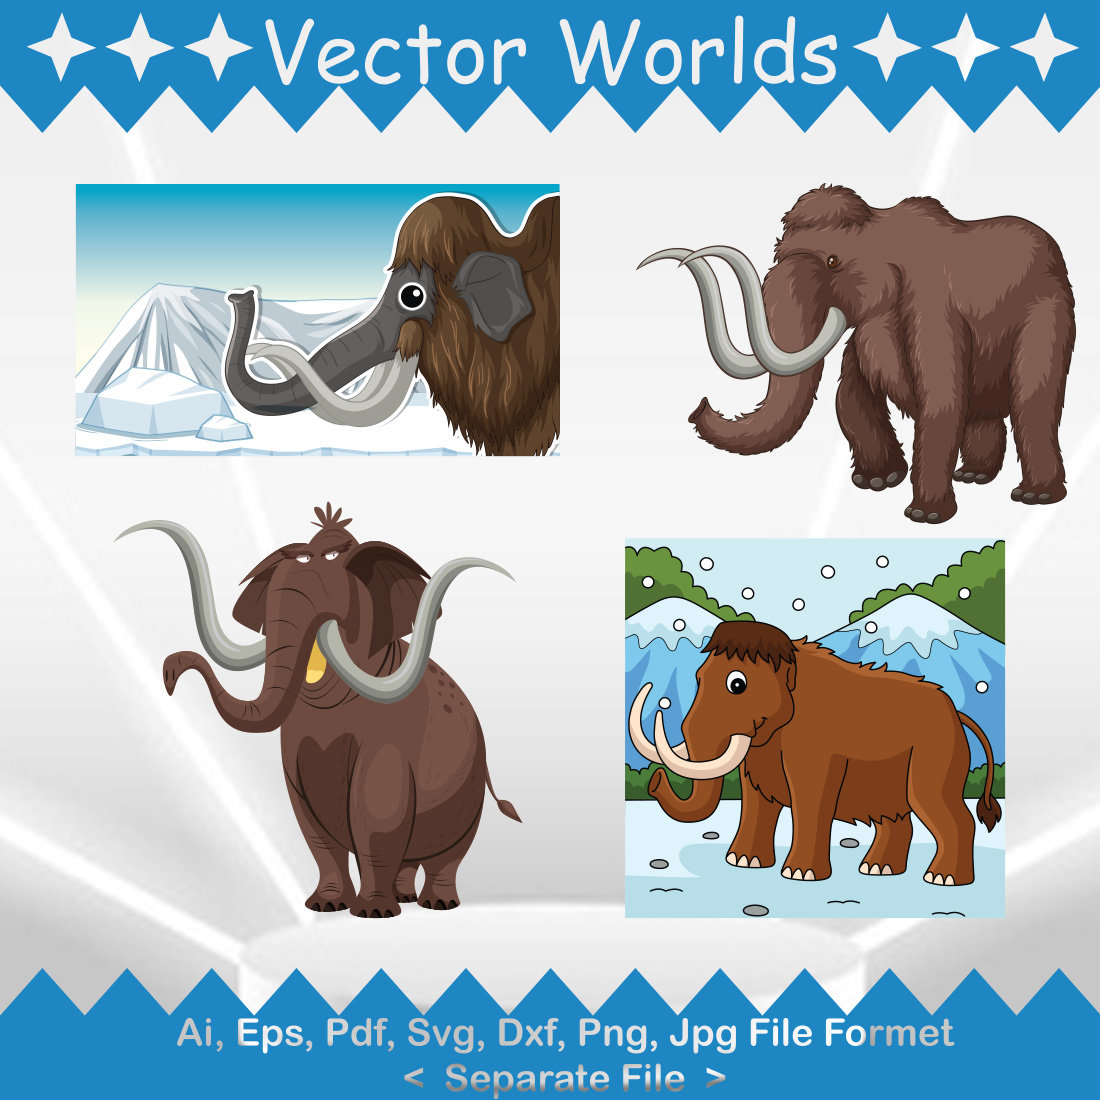 The Woolly Mammoth SVG Vector Design cover image.